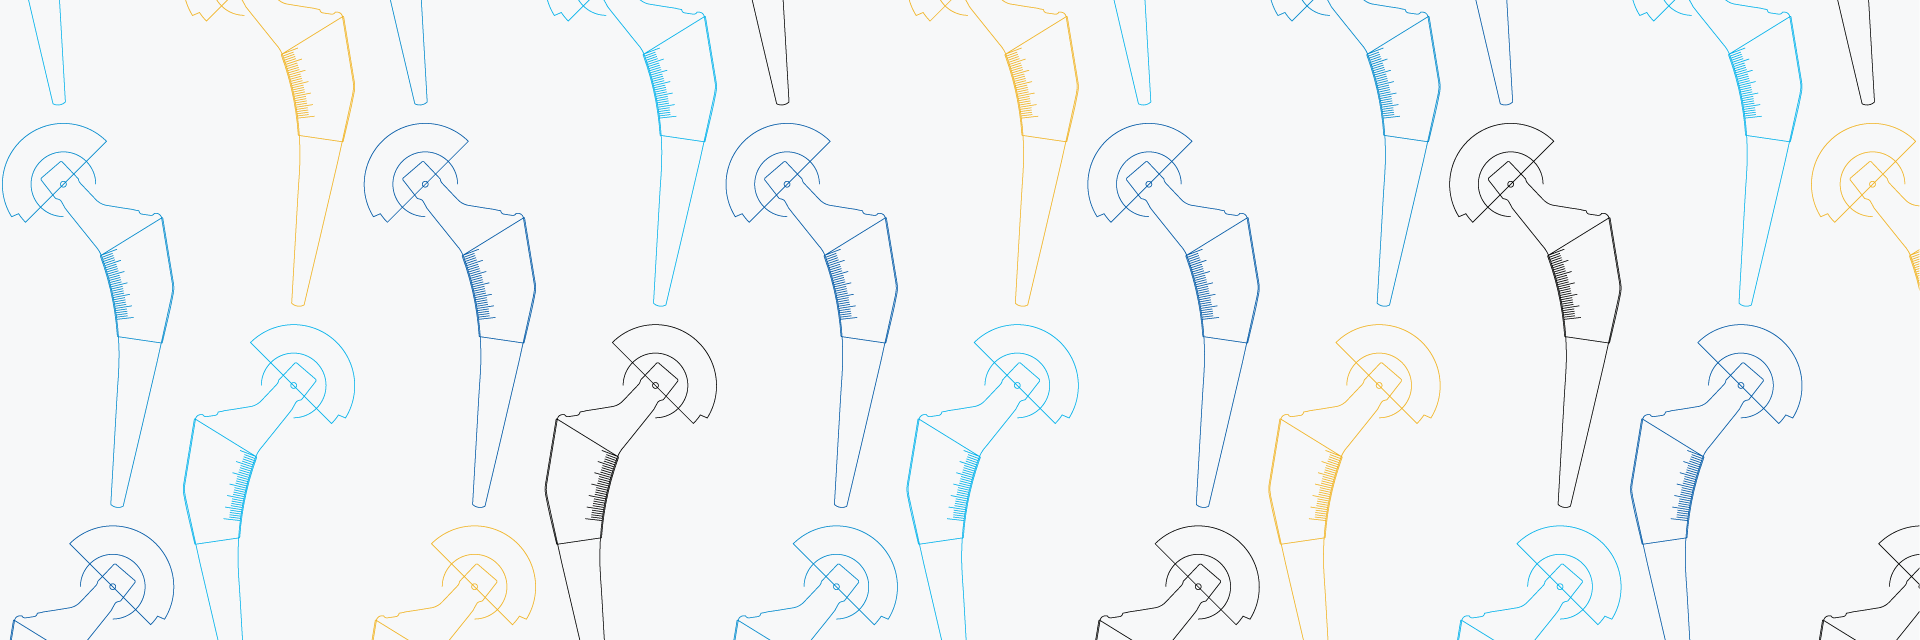 Illustrated pattern featuring colorful bone outlines with various measurements